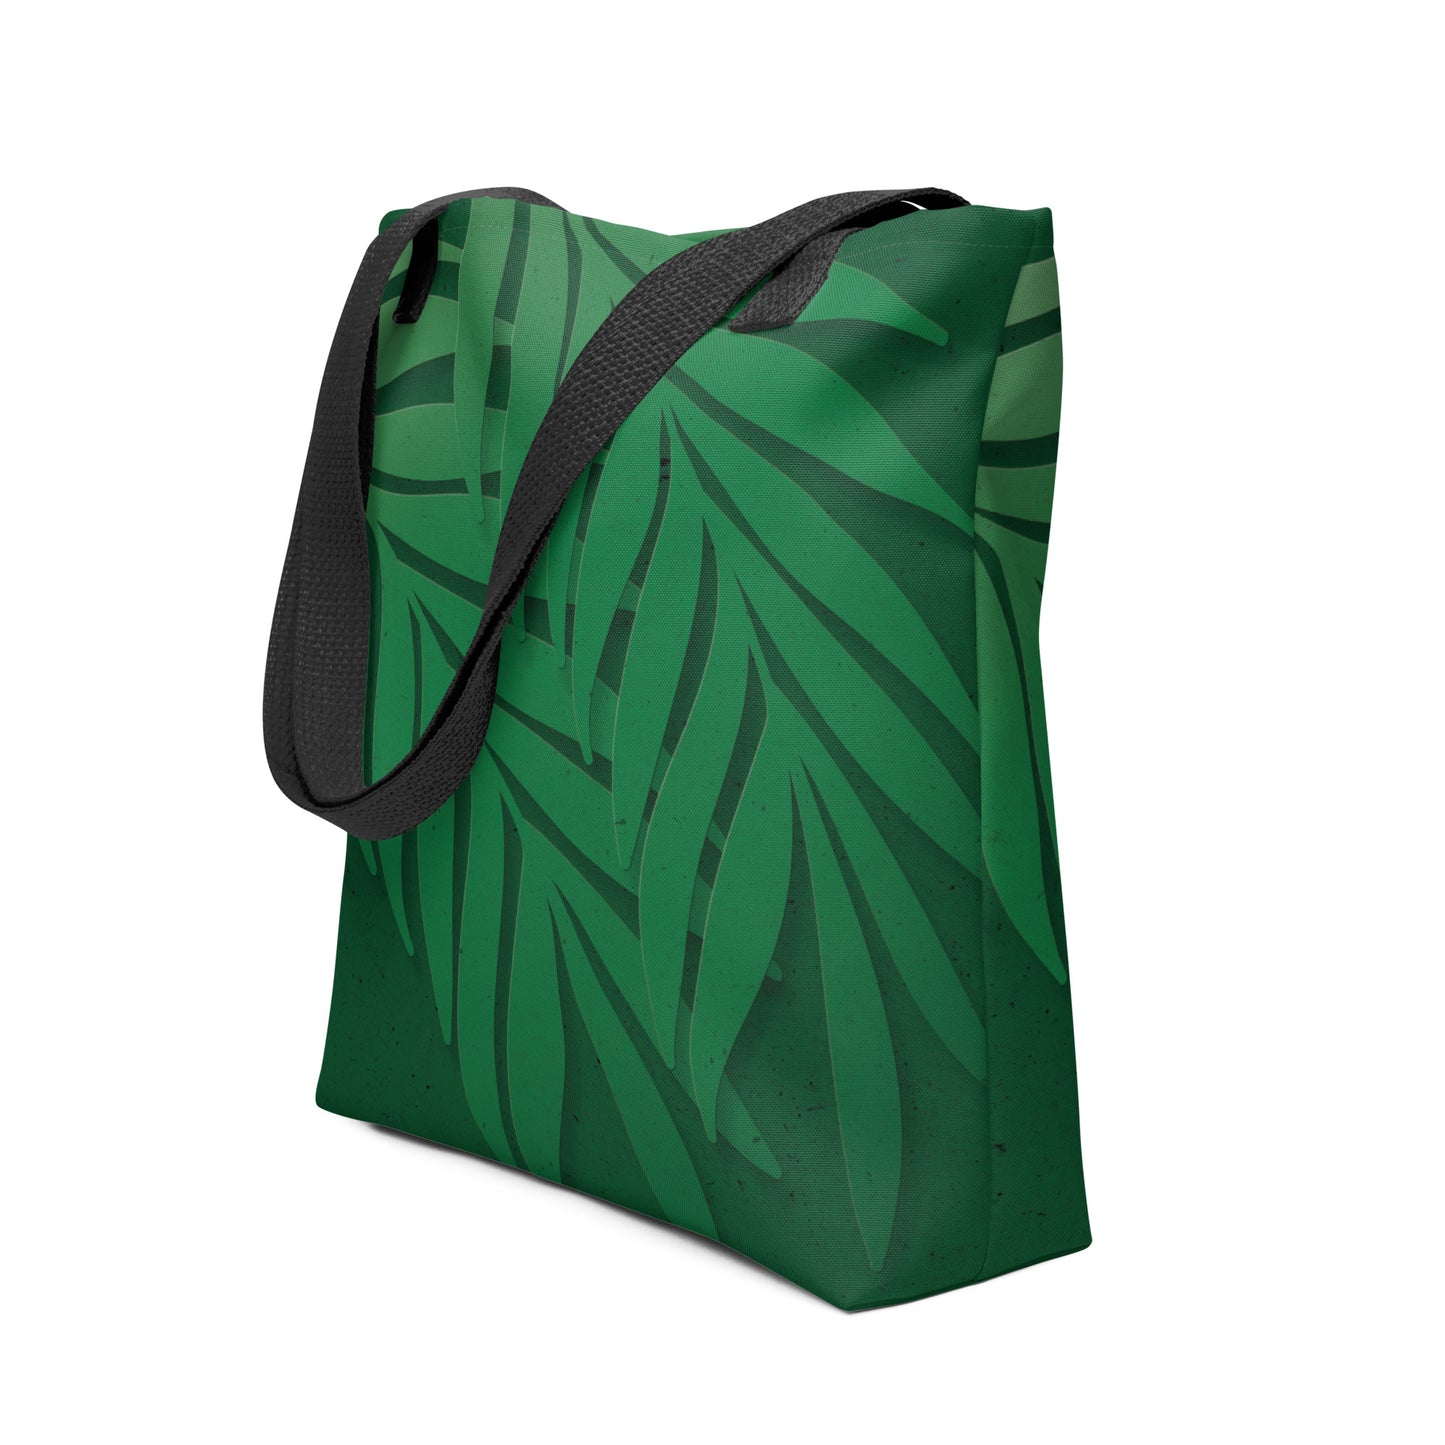 Palm Branches Tote Bag